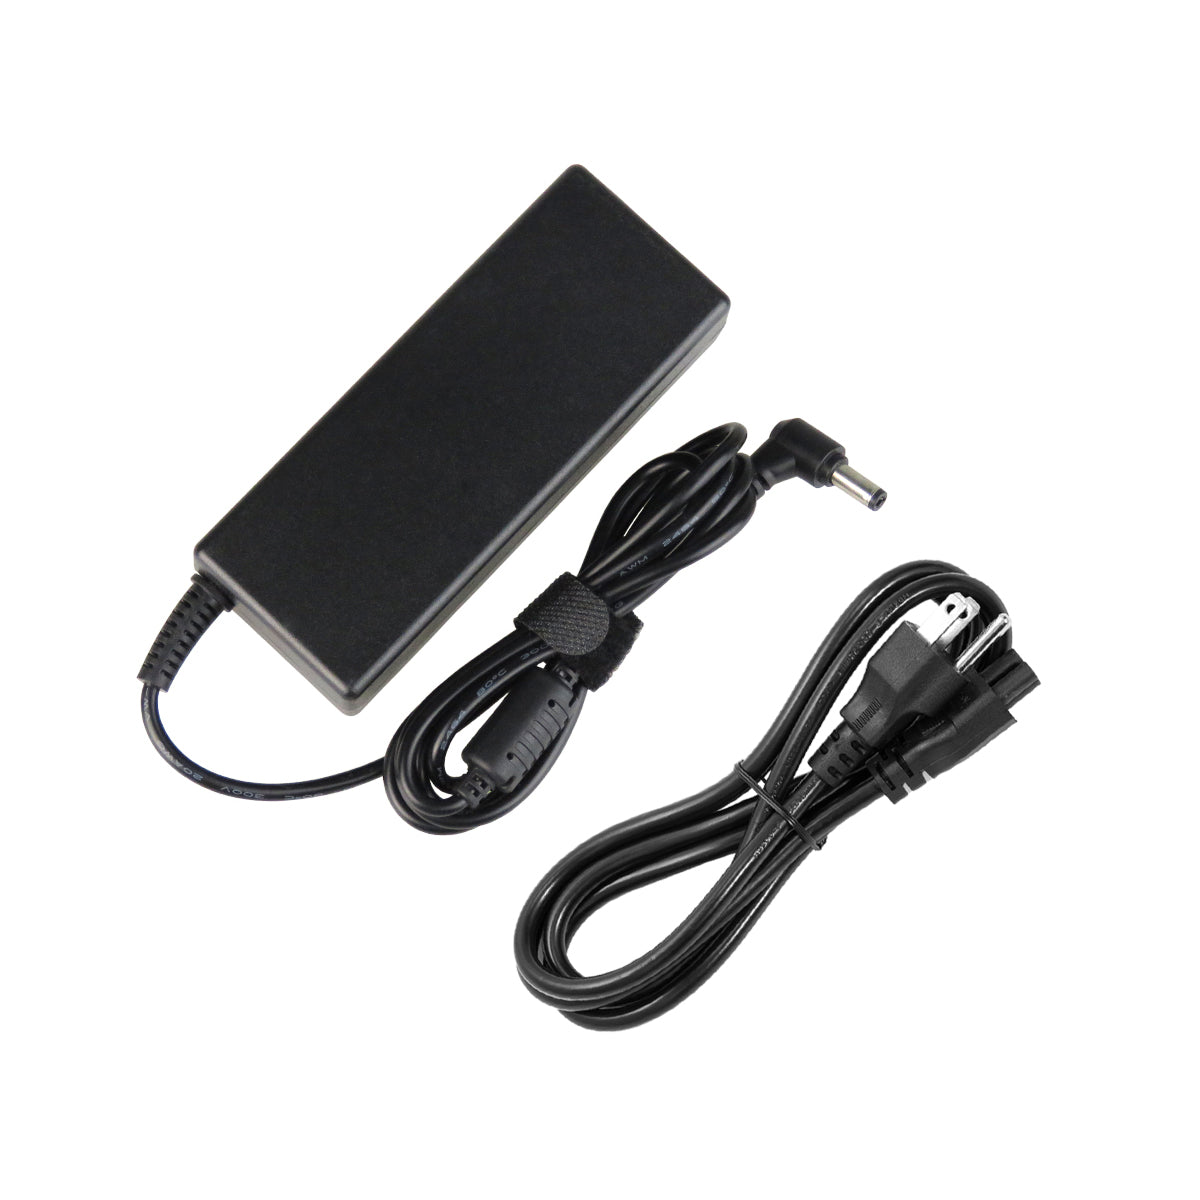 AC Adapter Charger for ASUS A9T Notebook.